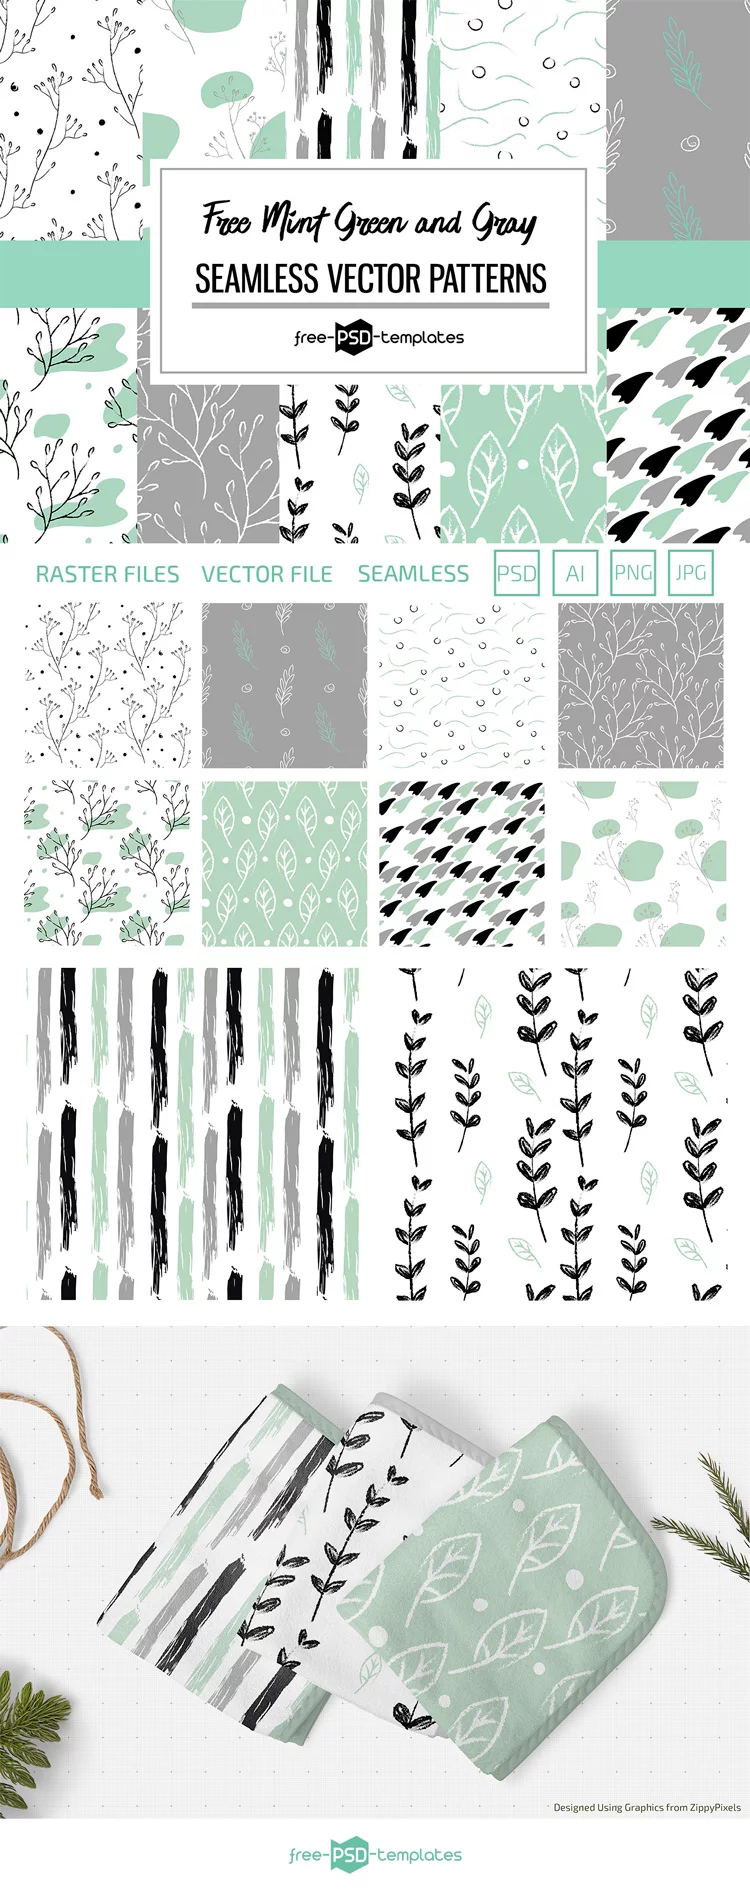 Free Mint Green and Gray Vector Patterns